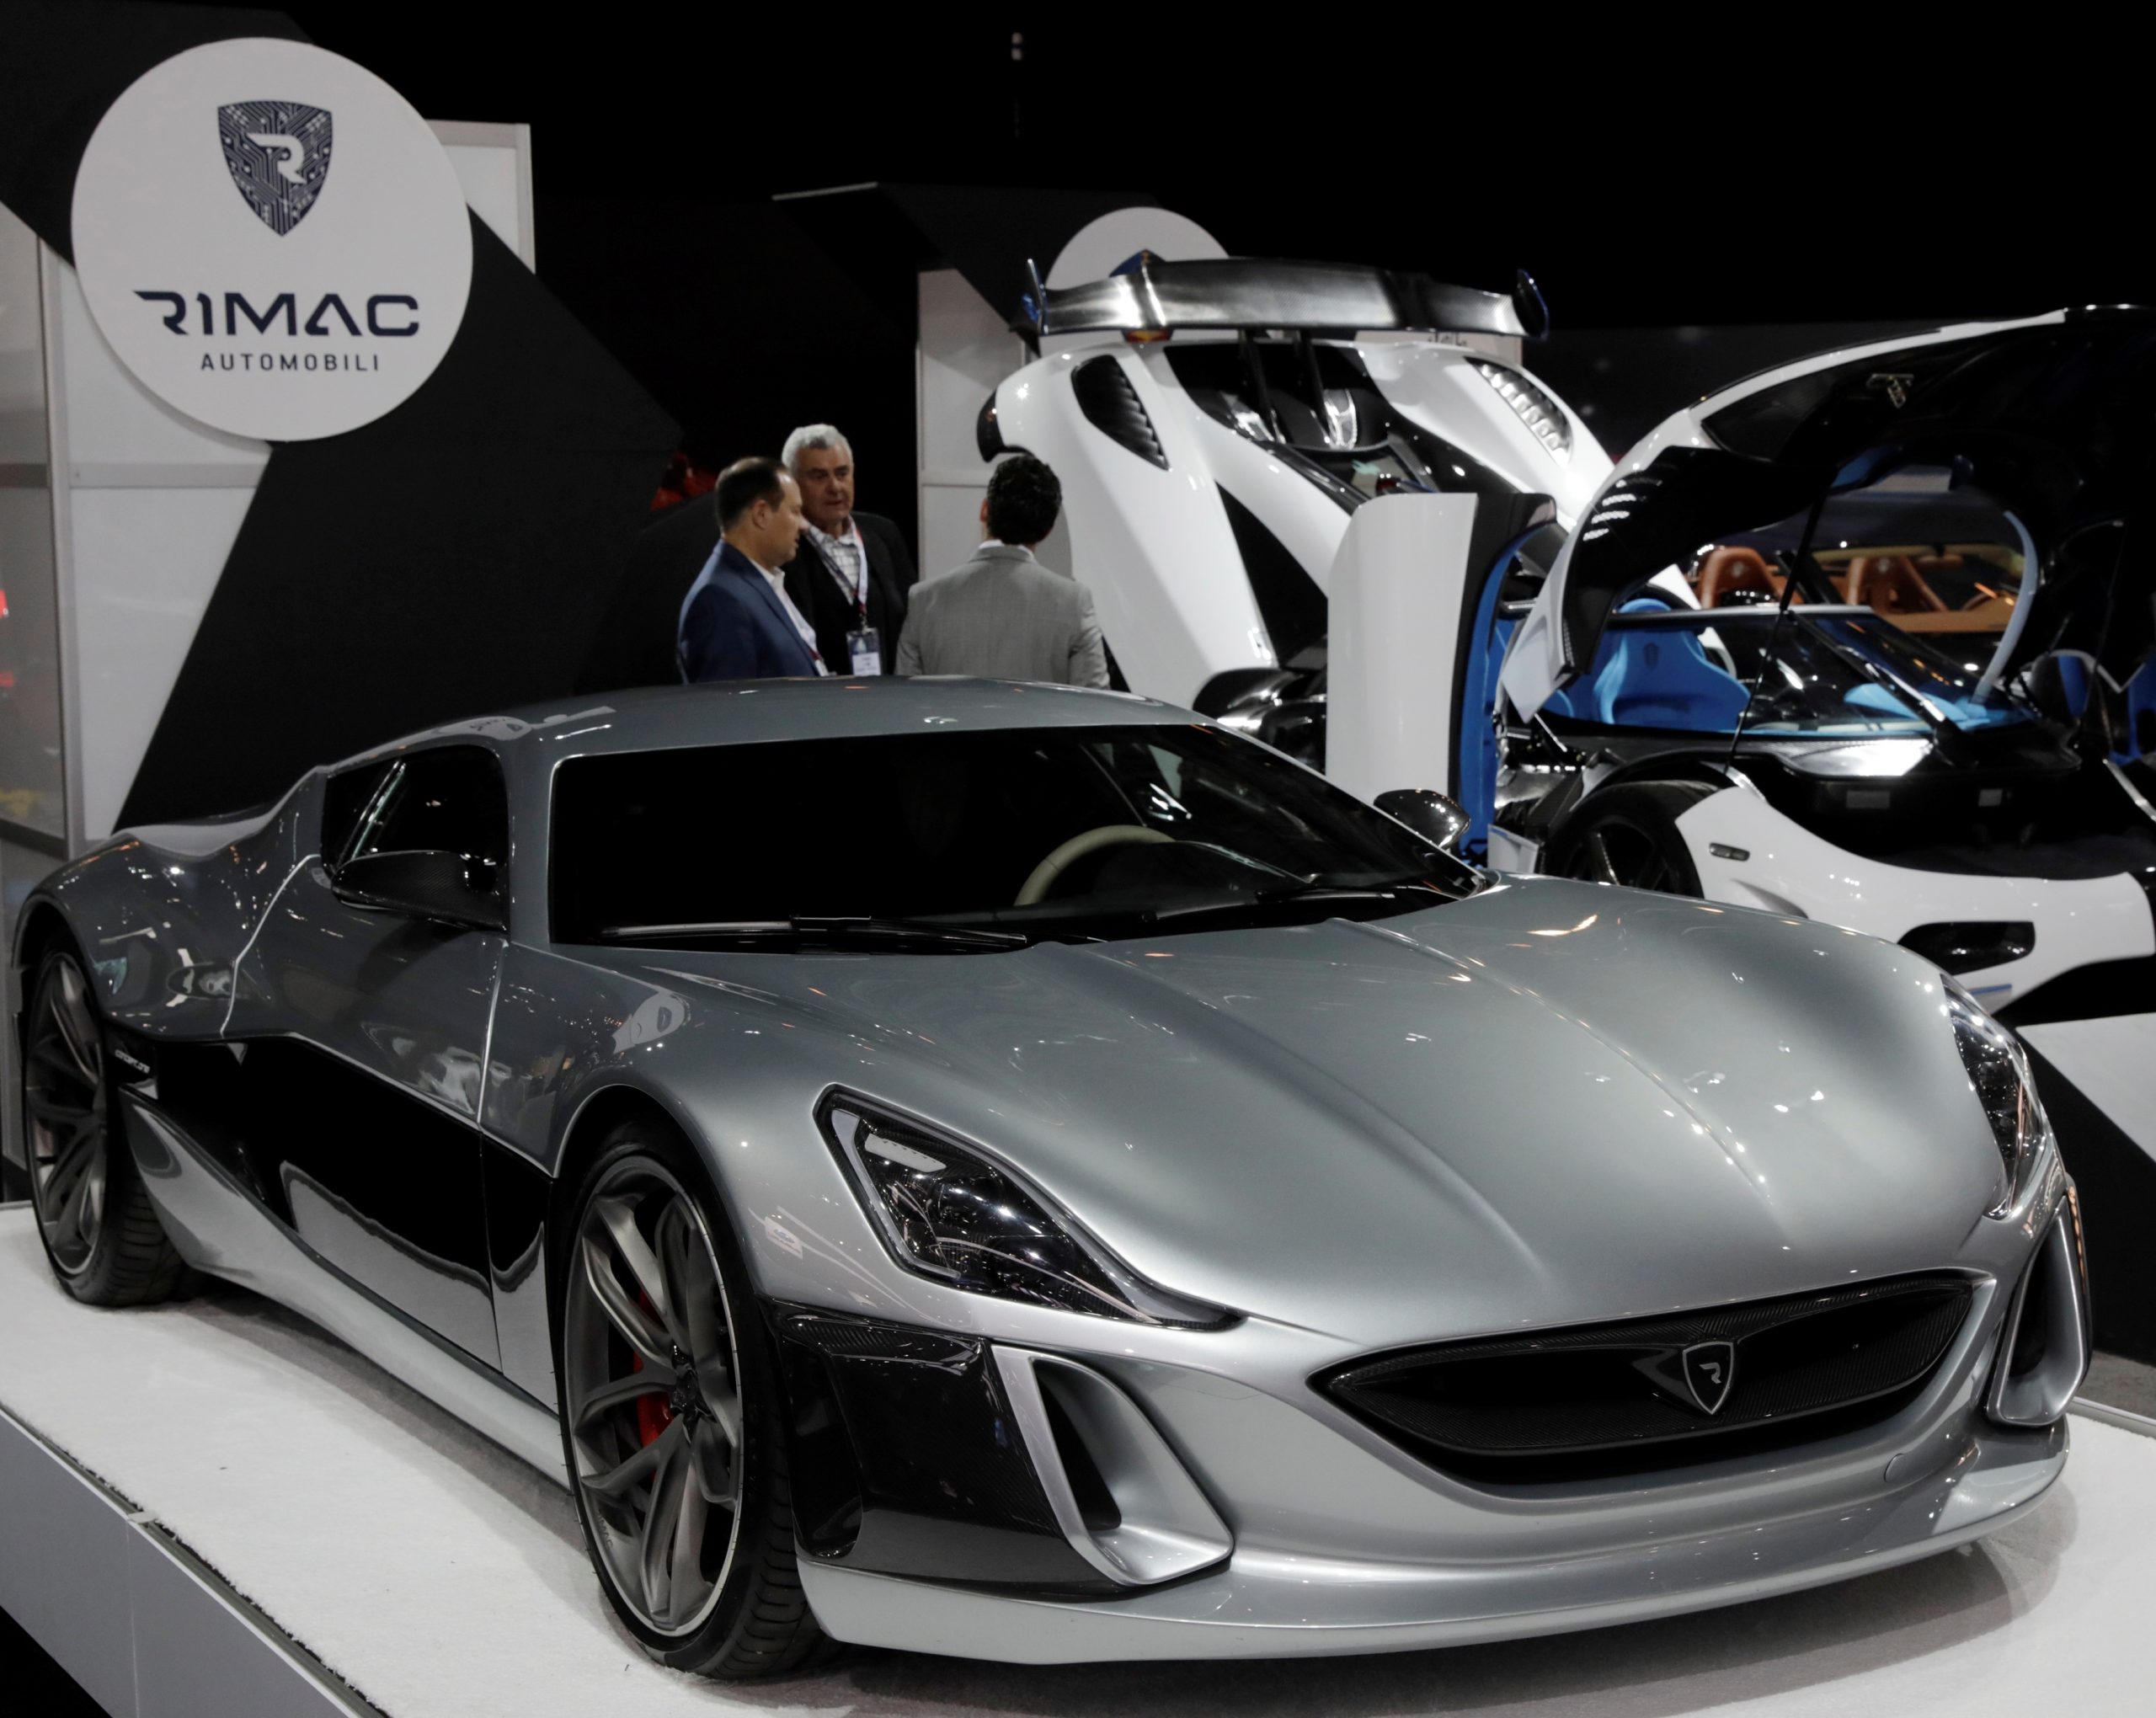 FILE PHOTO: Rimac Automobili Concept_One electric supercar is displayed at the 2017 New York International Auto Show in New York, U.S. FILE PHOTO: A Rimac Automobili Concept_One electric supercar, worth $1.2 million and one of only eight made, is displayed at the 2017 New York International Auto Show in New York City, U.S. April 13, 2017. REUTERS/Lucas Jackson/File Photo Lucas Jackson